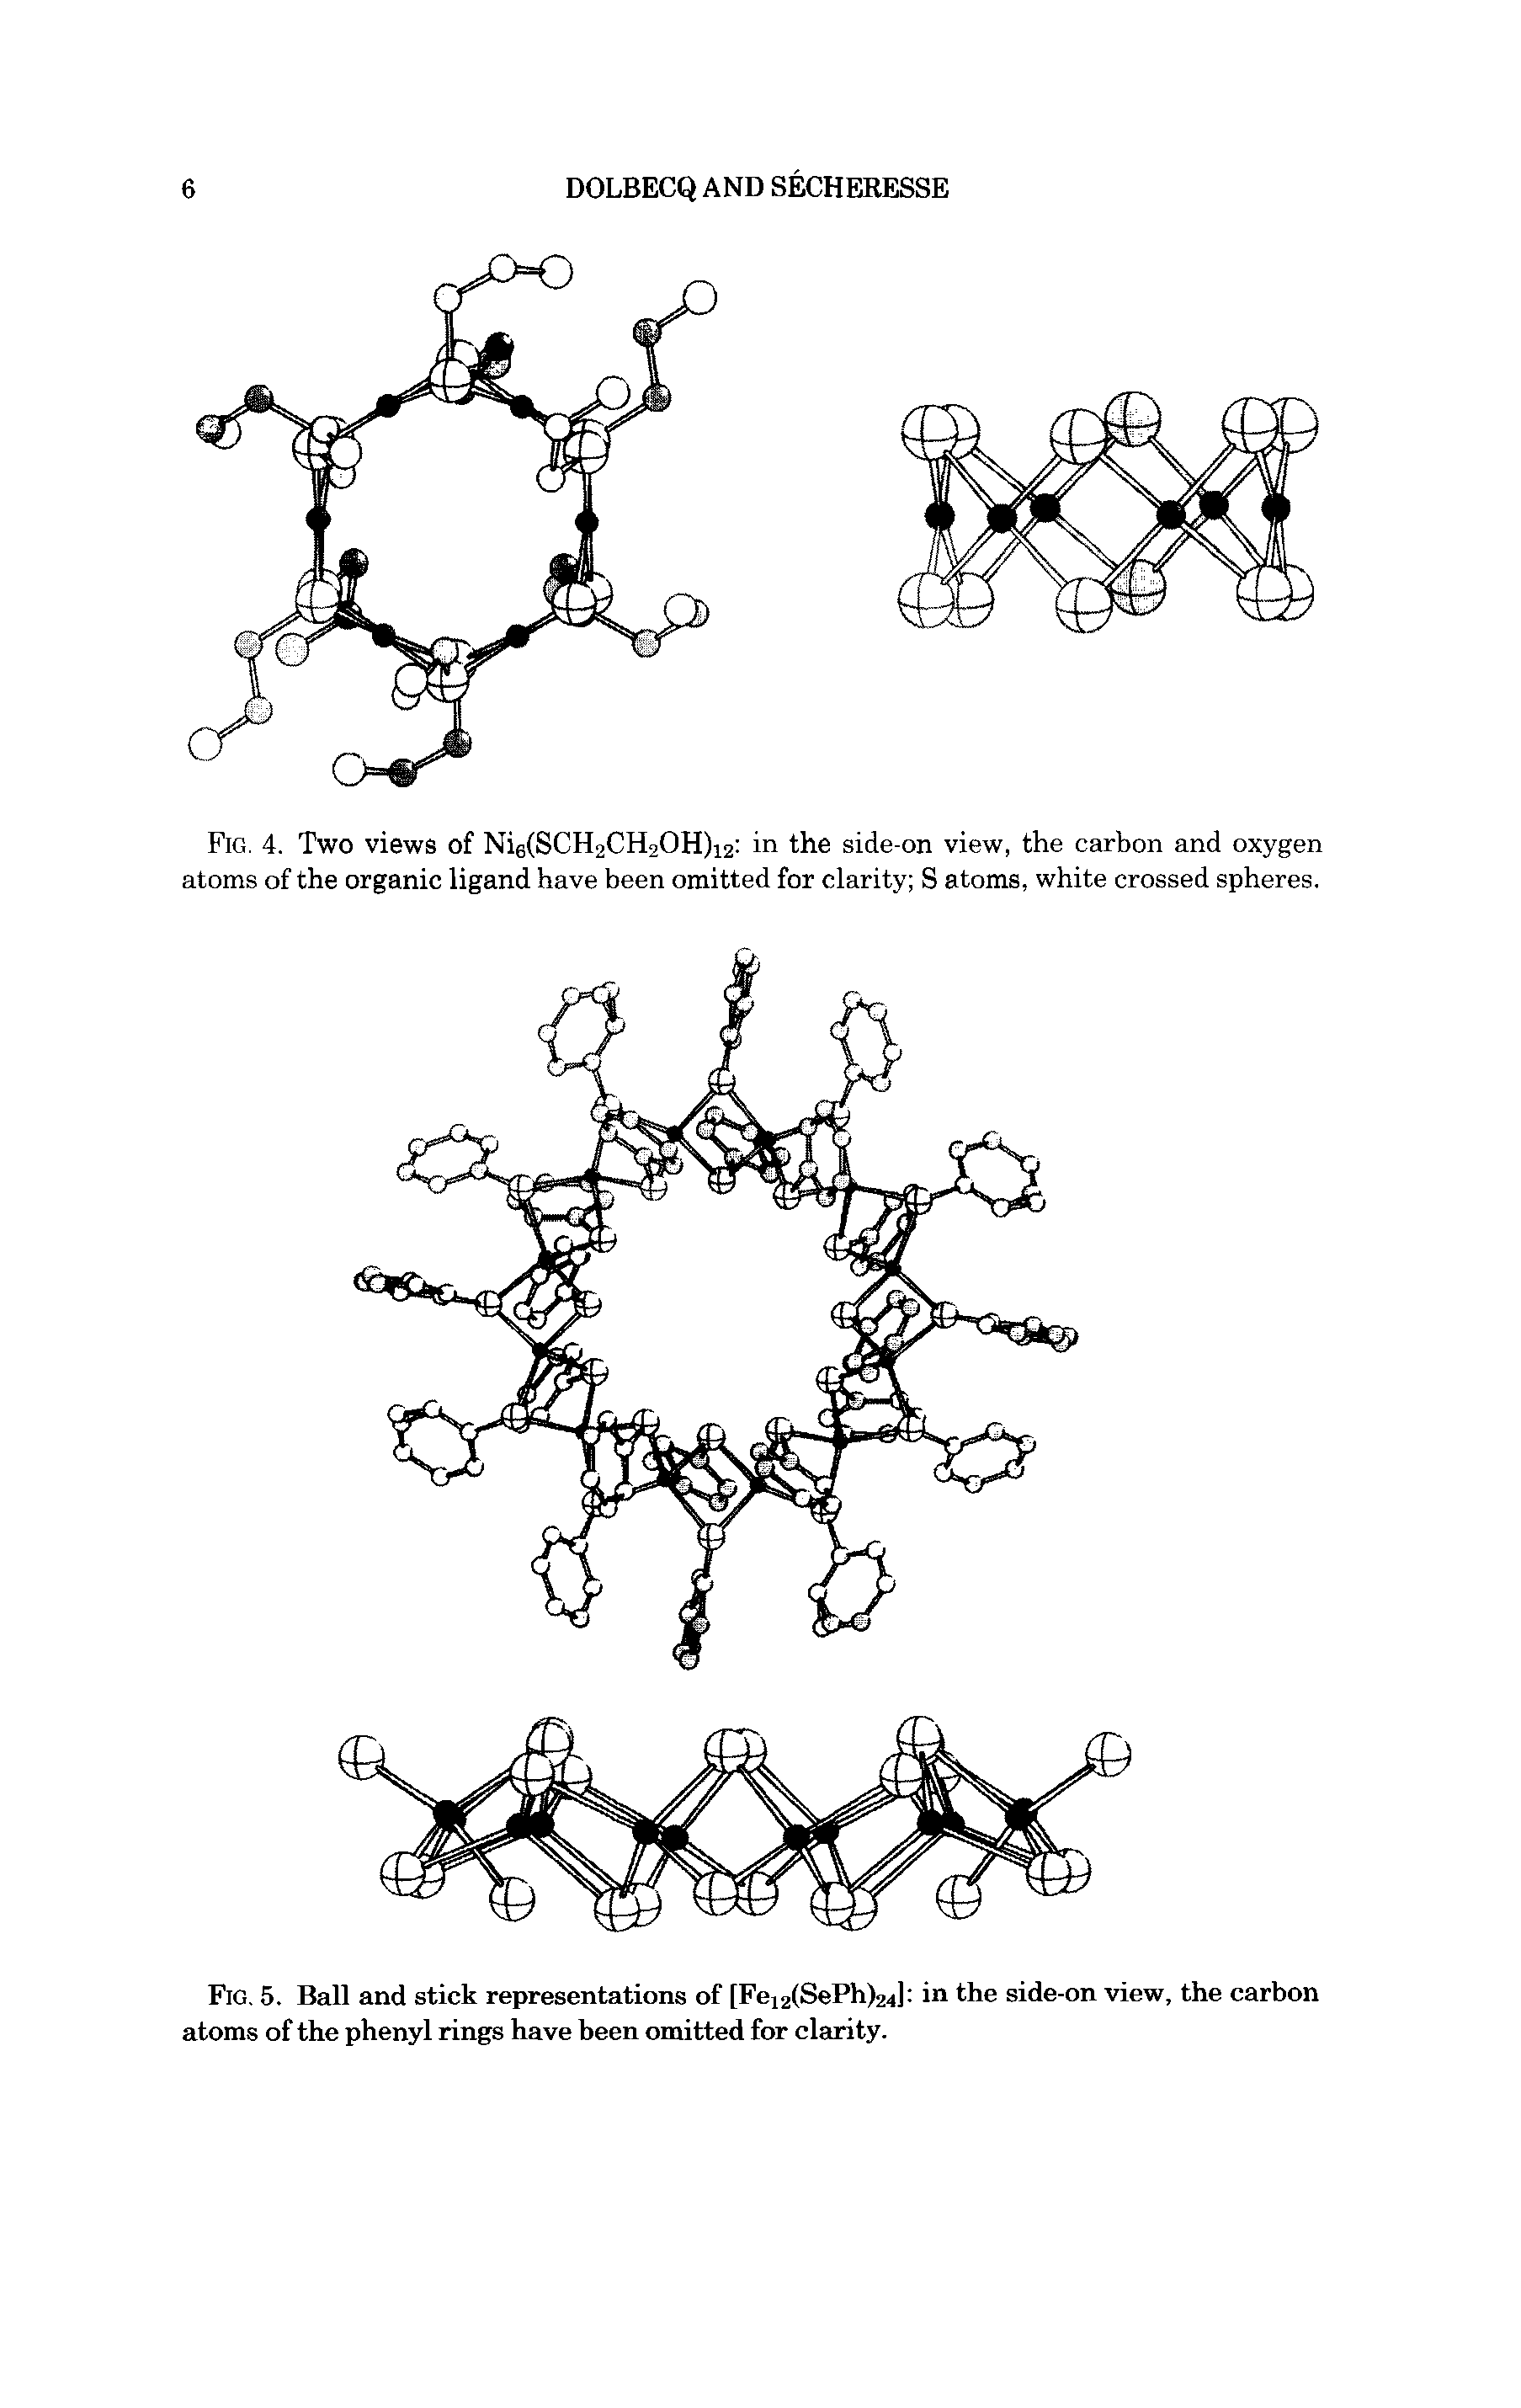 Fig. 5. Ball and stick representations of [Fei2(SePh)24] in the side-on view, the carbon atoms of the phenyl rings have been omitted for clarity.